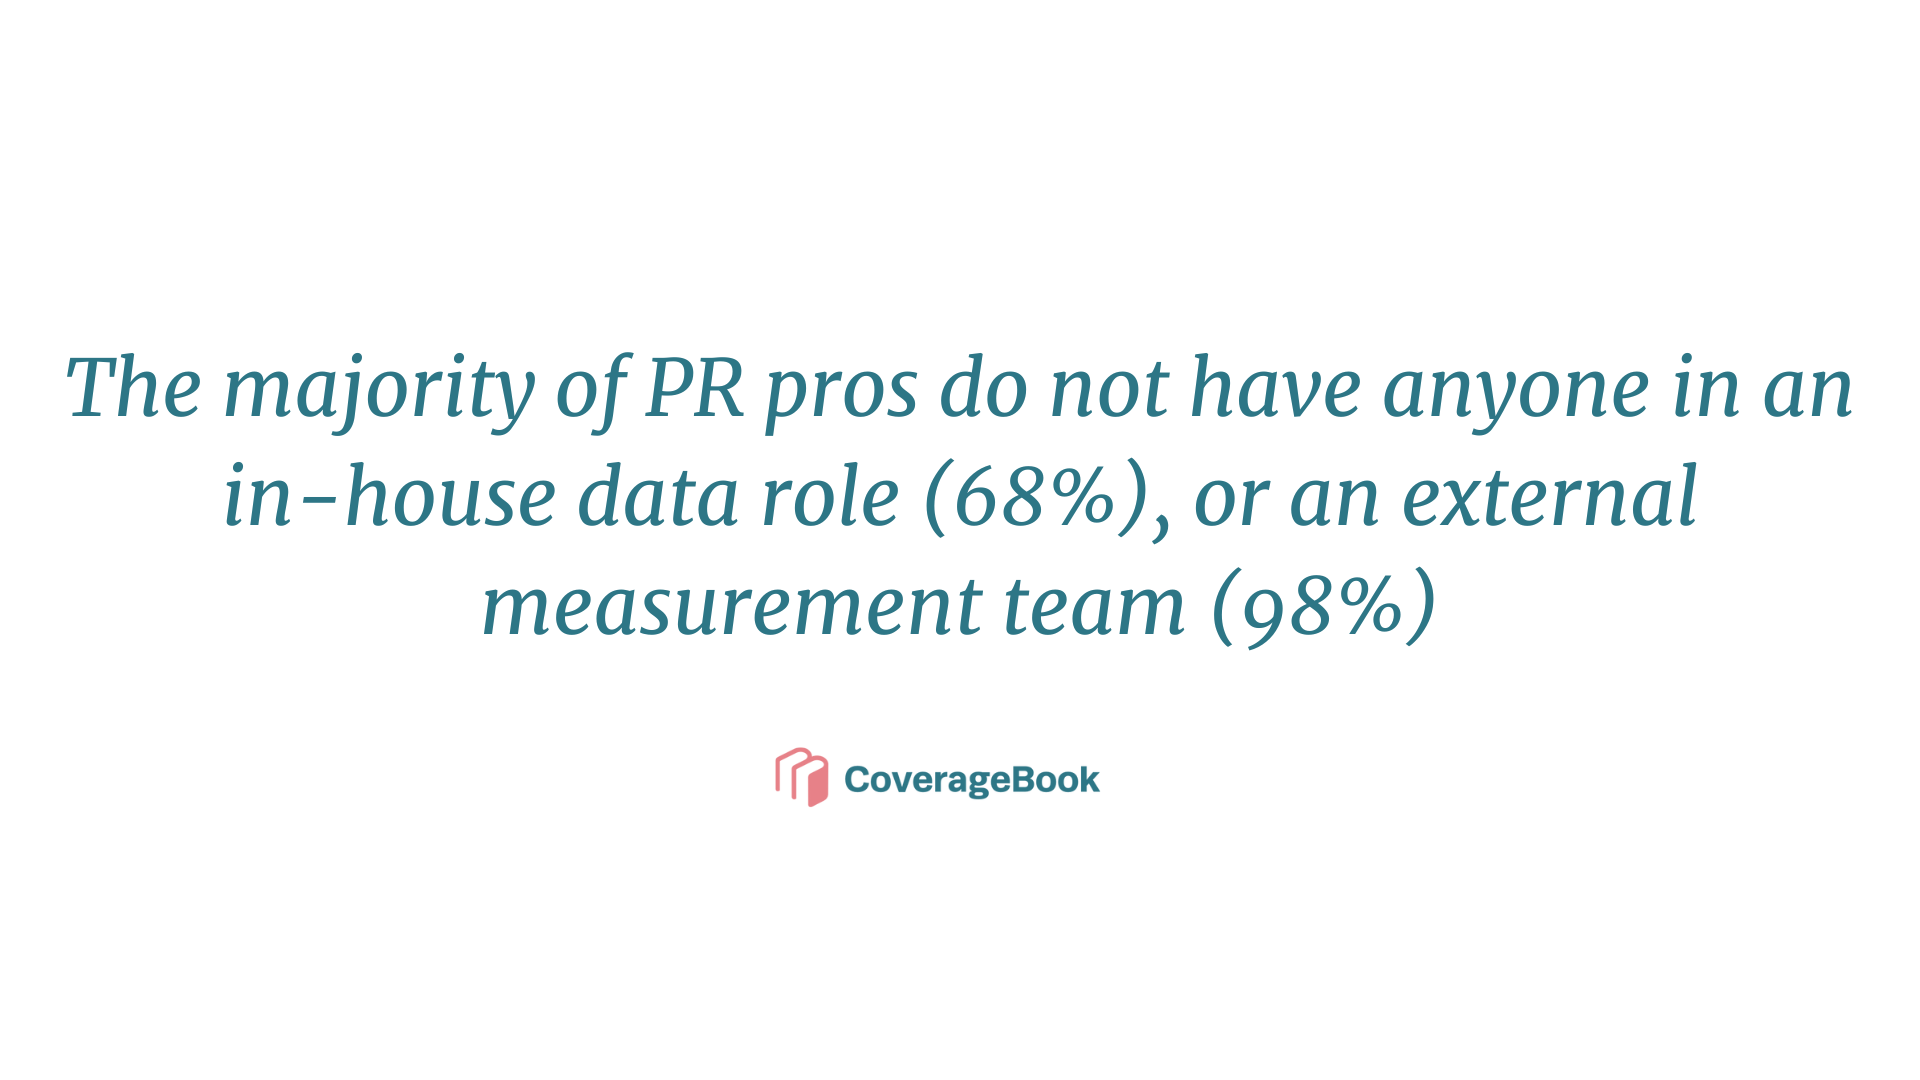 The majority of PR pros don't have anyone in an in-hpuse data role (68%) or an external measurement team (98%)